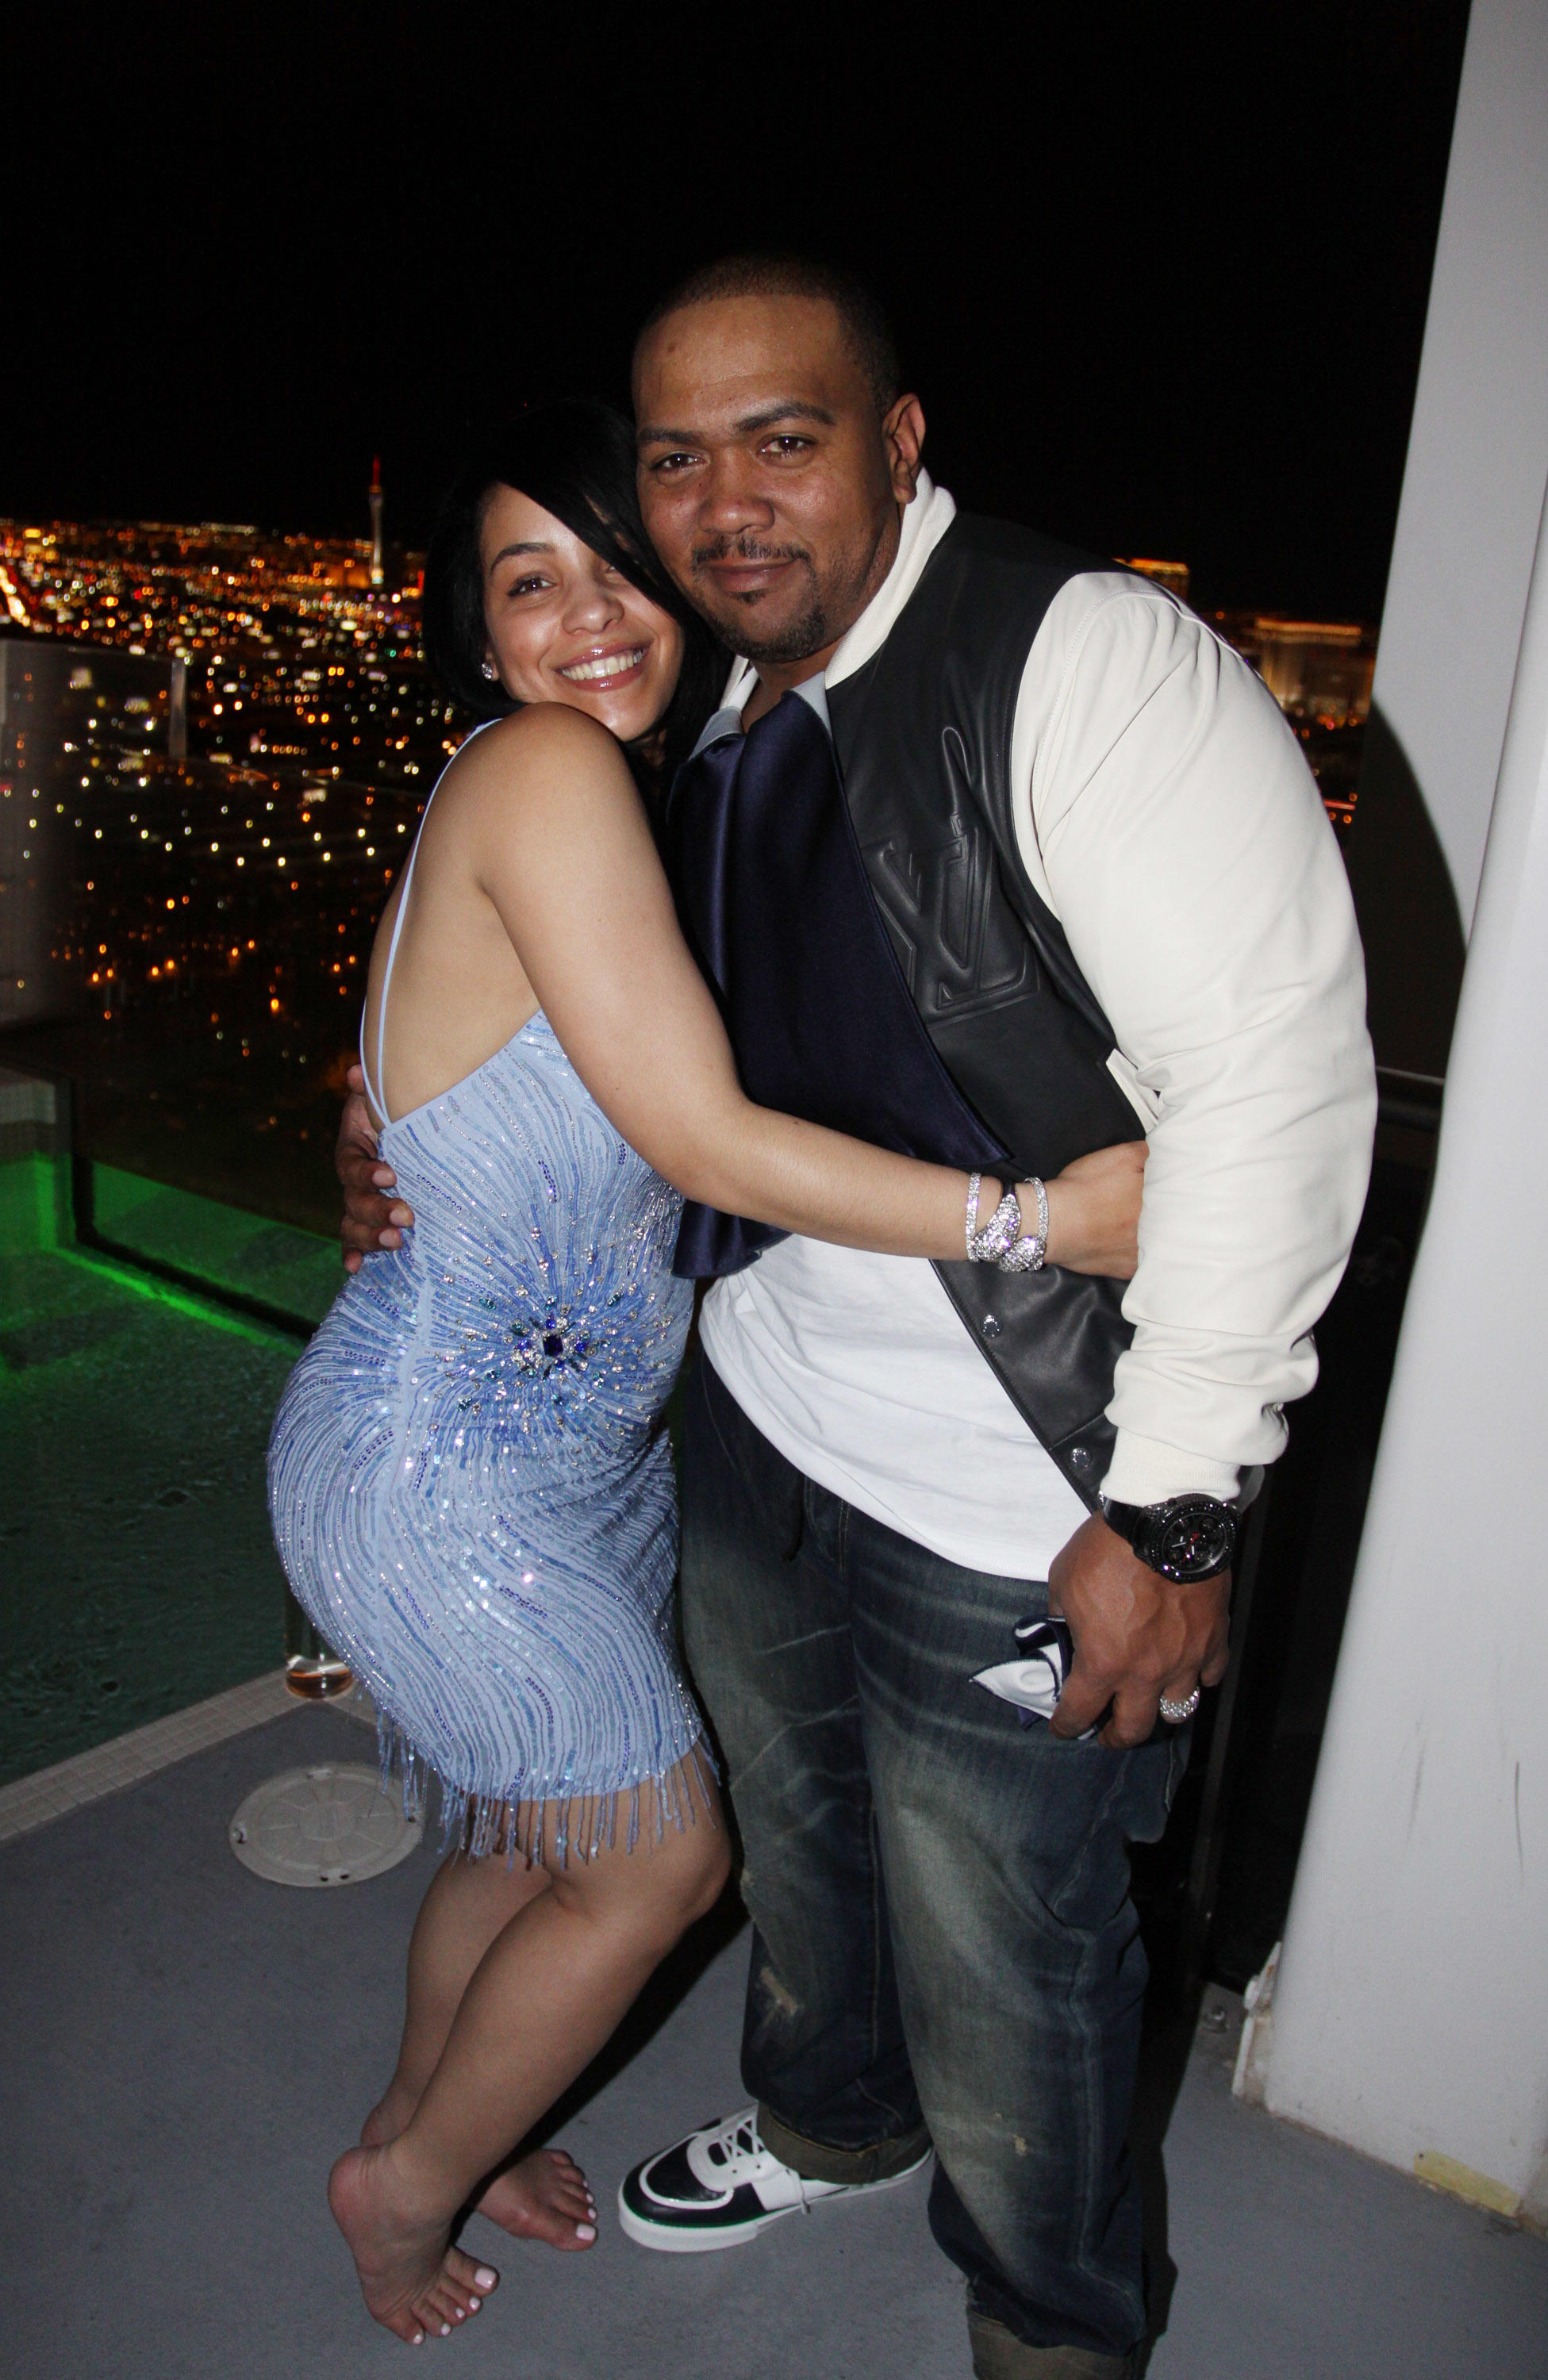 Symposium Of later is genoeg Timbaland's Wife Files For Another Divorce